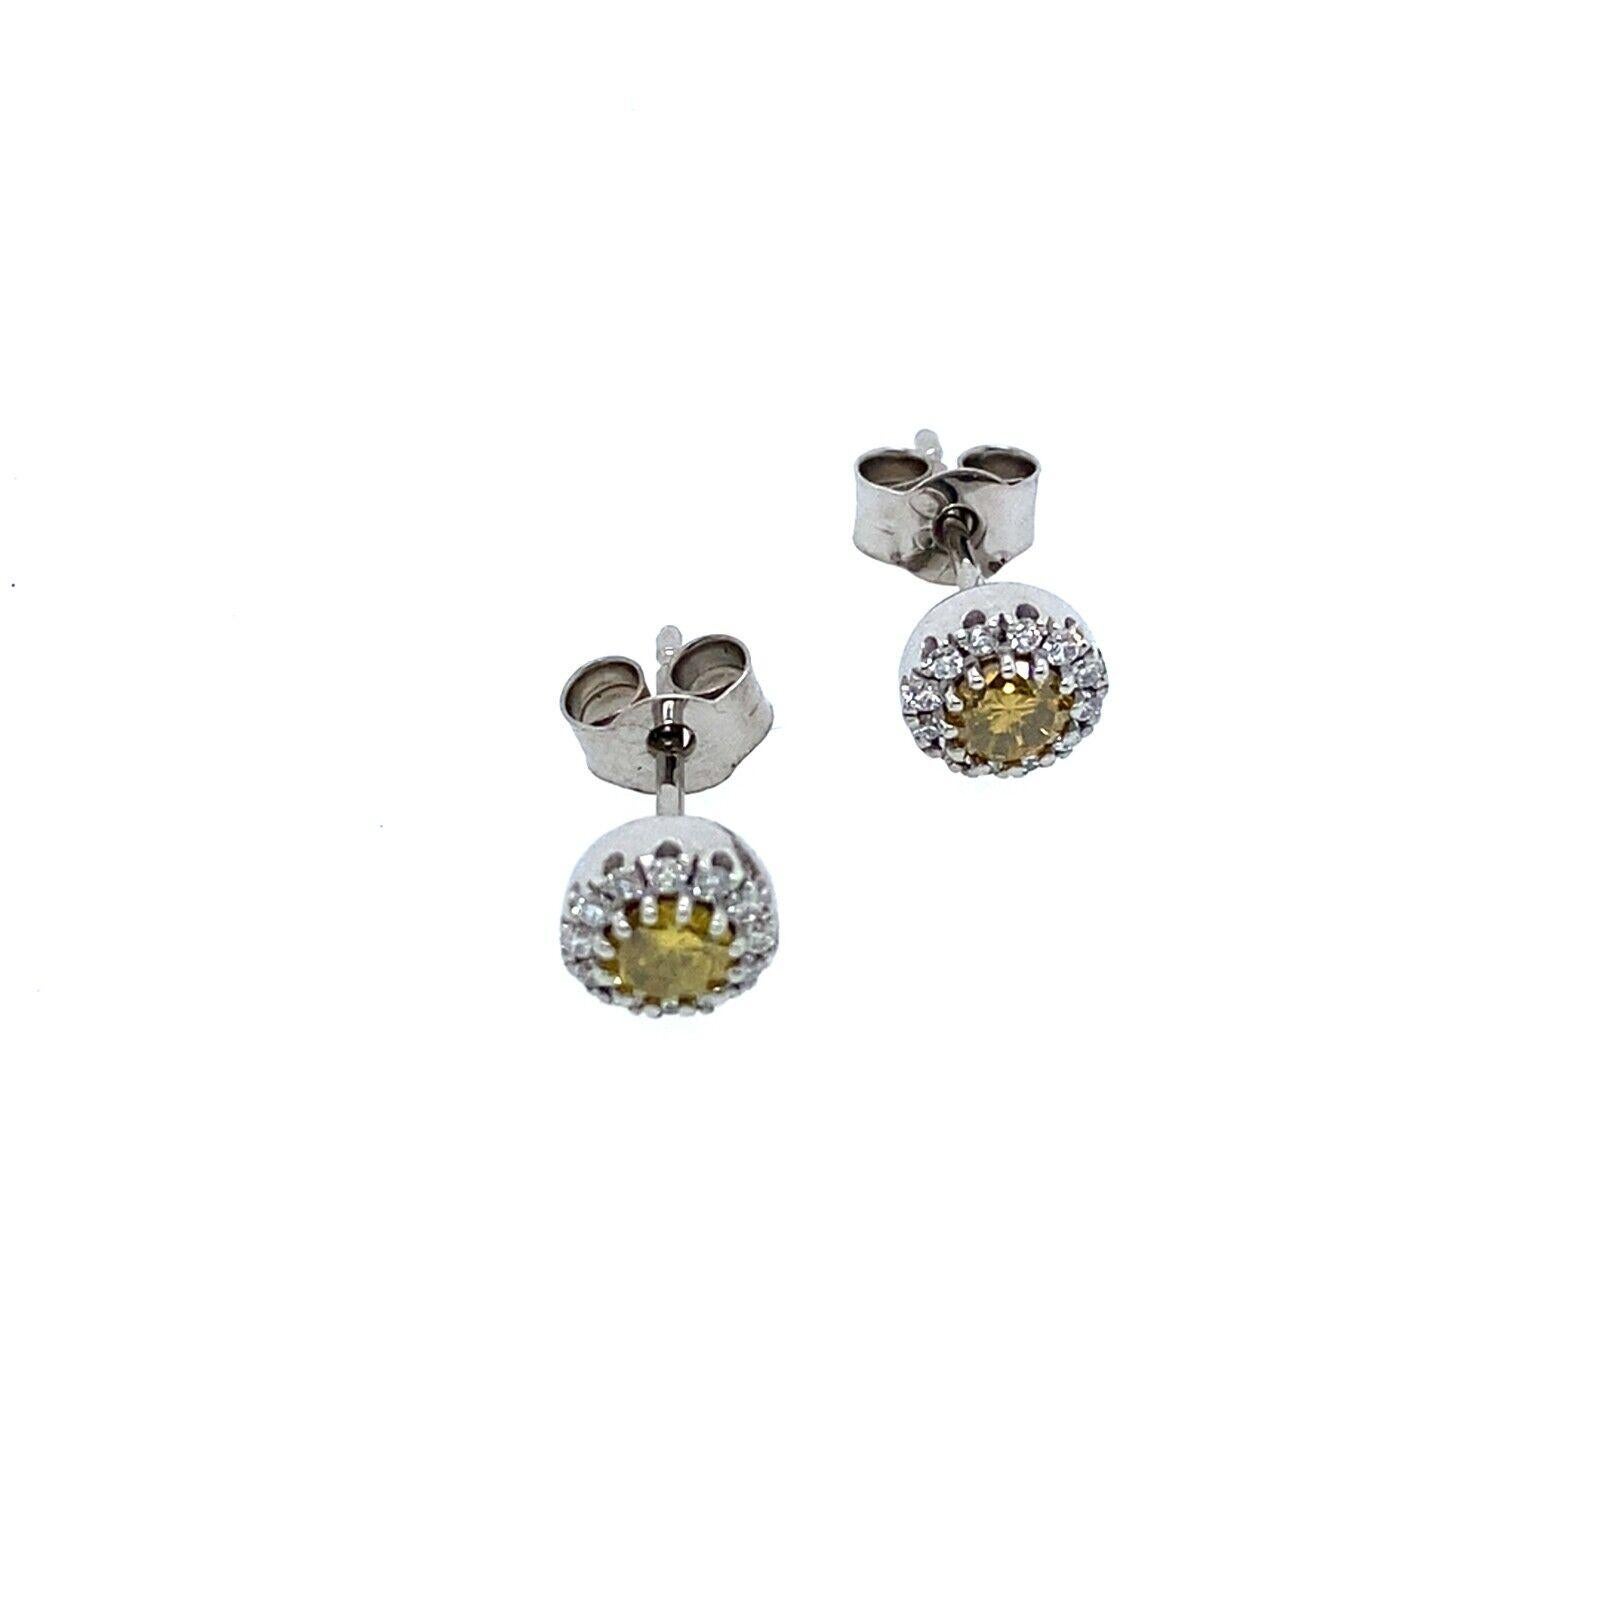 This pair of earrings is set with 2 intense yellow Diamonds that is surrounded by 0.16ct of G/VS white Diamonds. The yellow Diamond is a natural Diamond and the white diamonds are VS diamonds, set in 18ct White Gold and the earrings. With Peg +